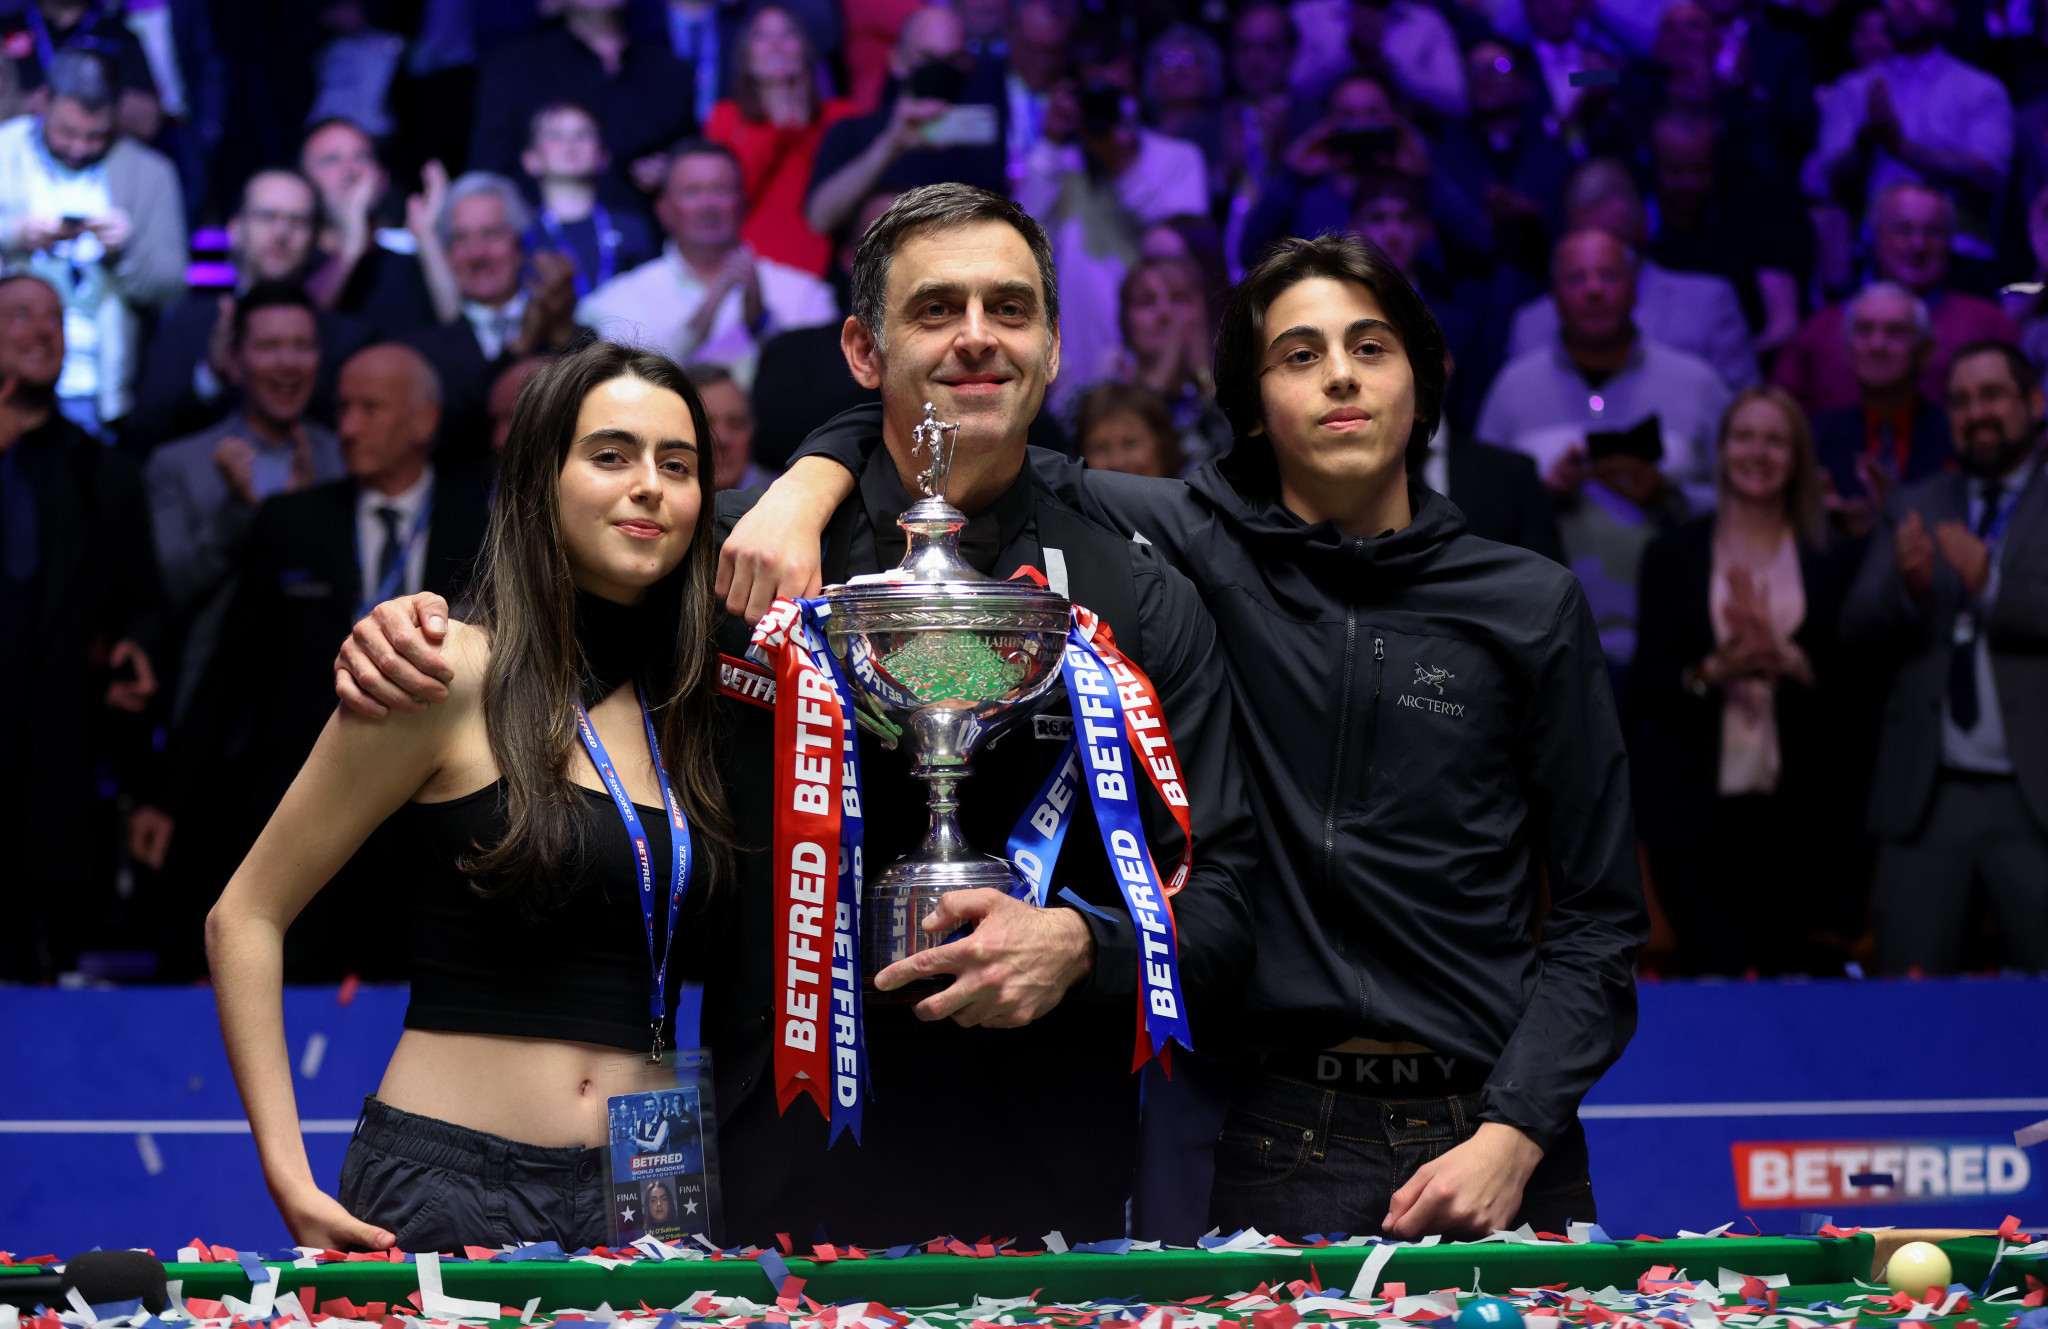 World Snooker set to hold groundbreaking World Mixed Doubles tournament